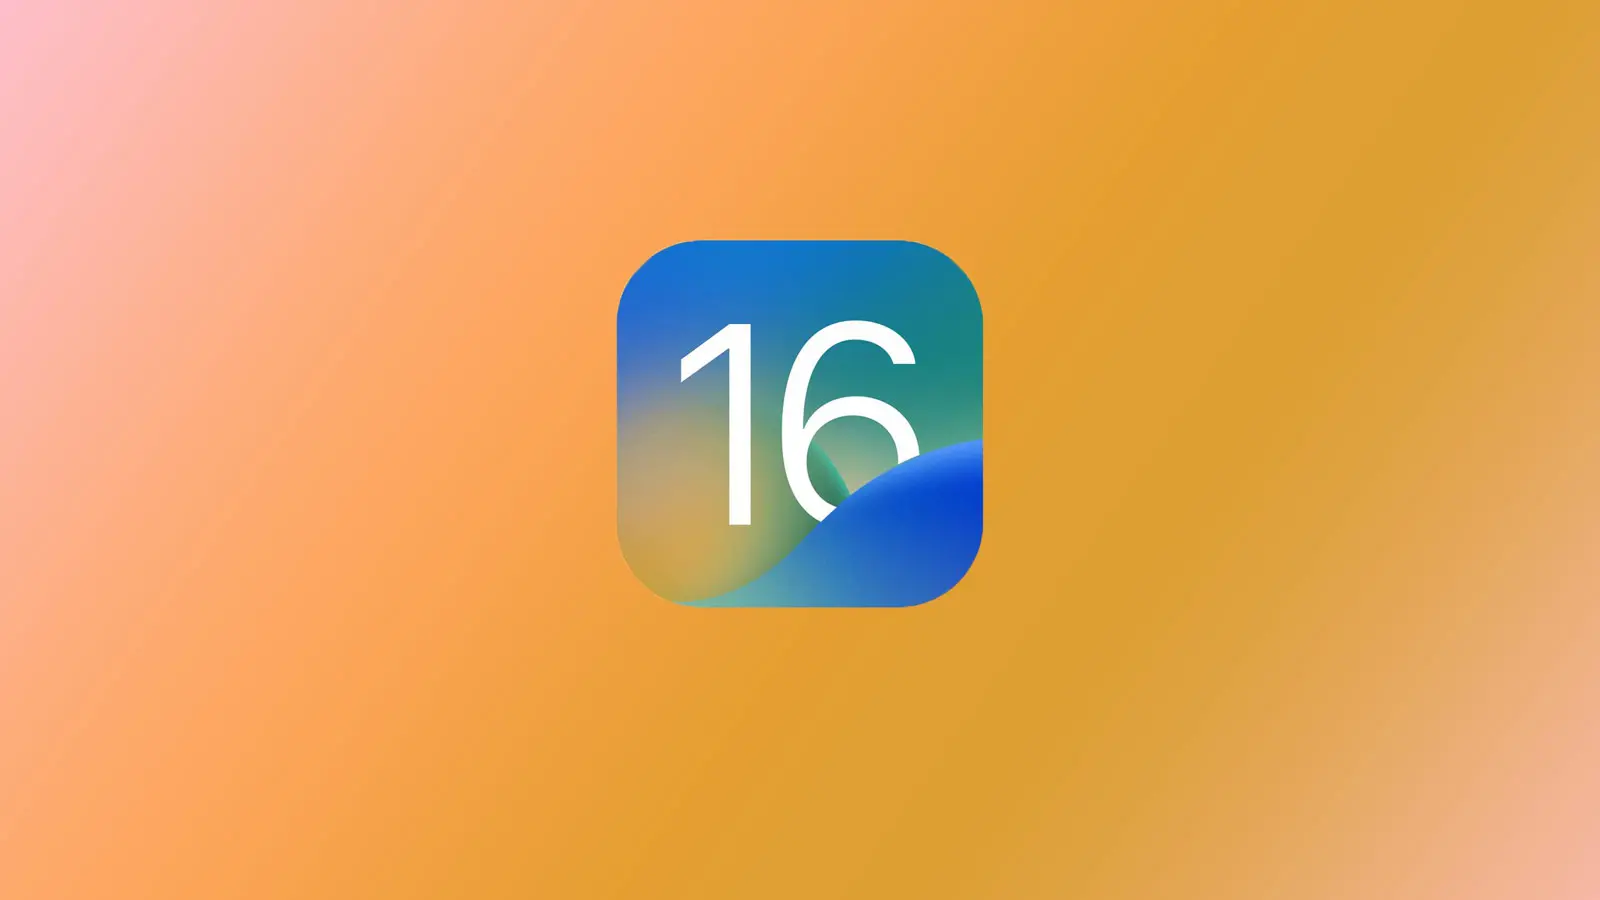 ios16 features 2022 coming in